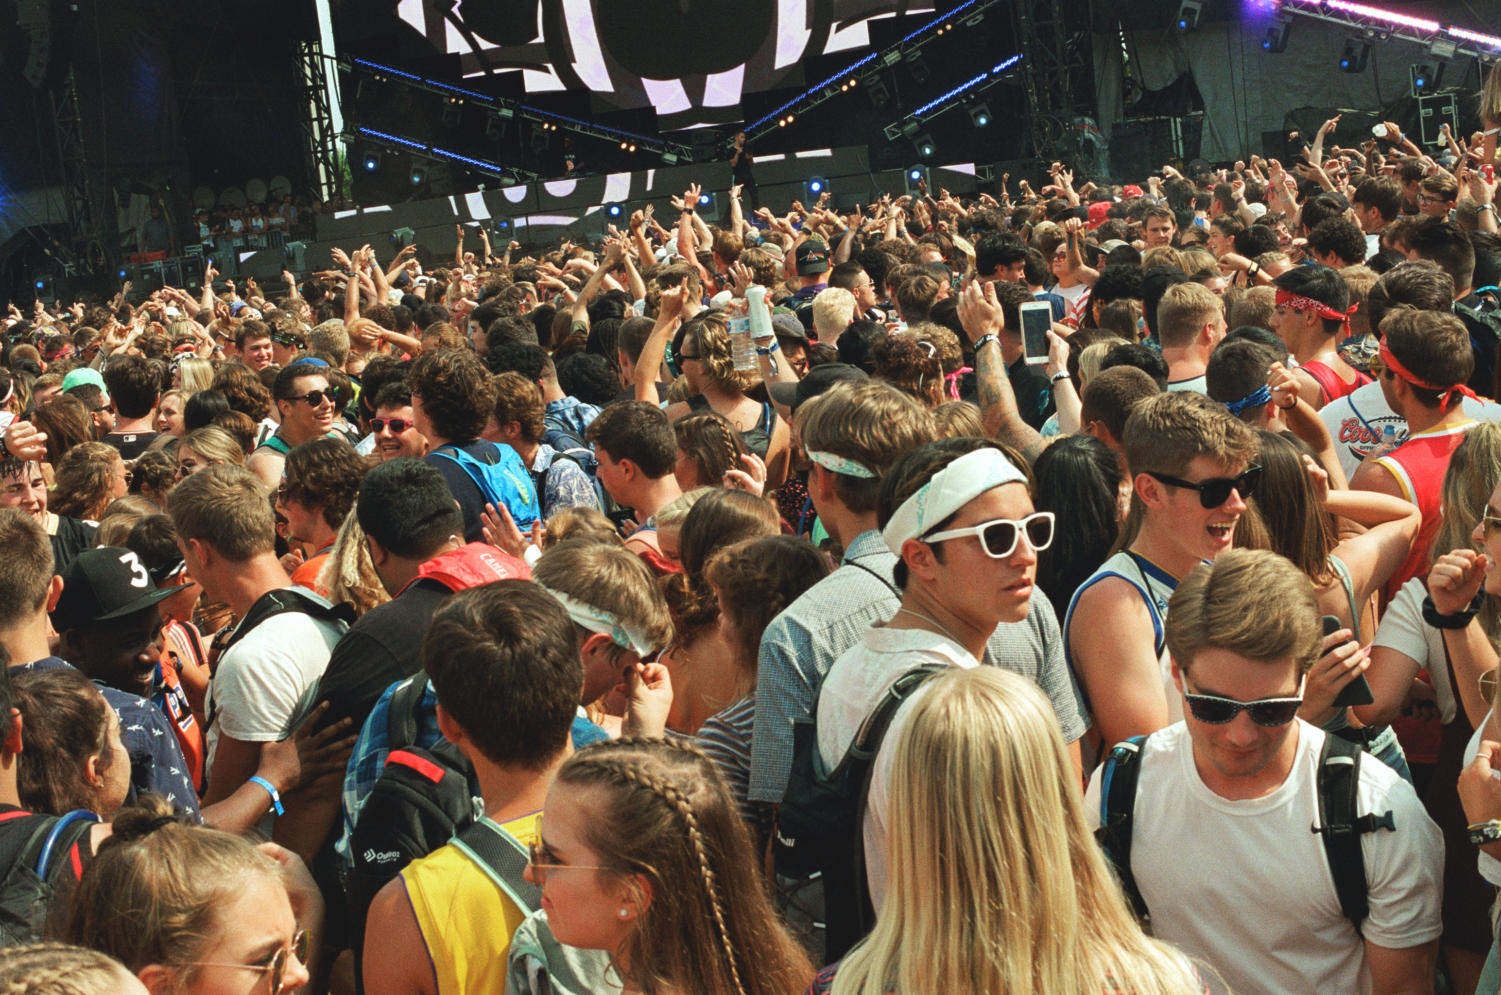 A crowd at Perry's stage, where electronica acts play.